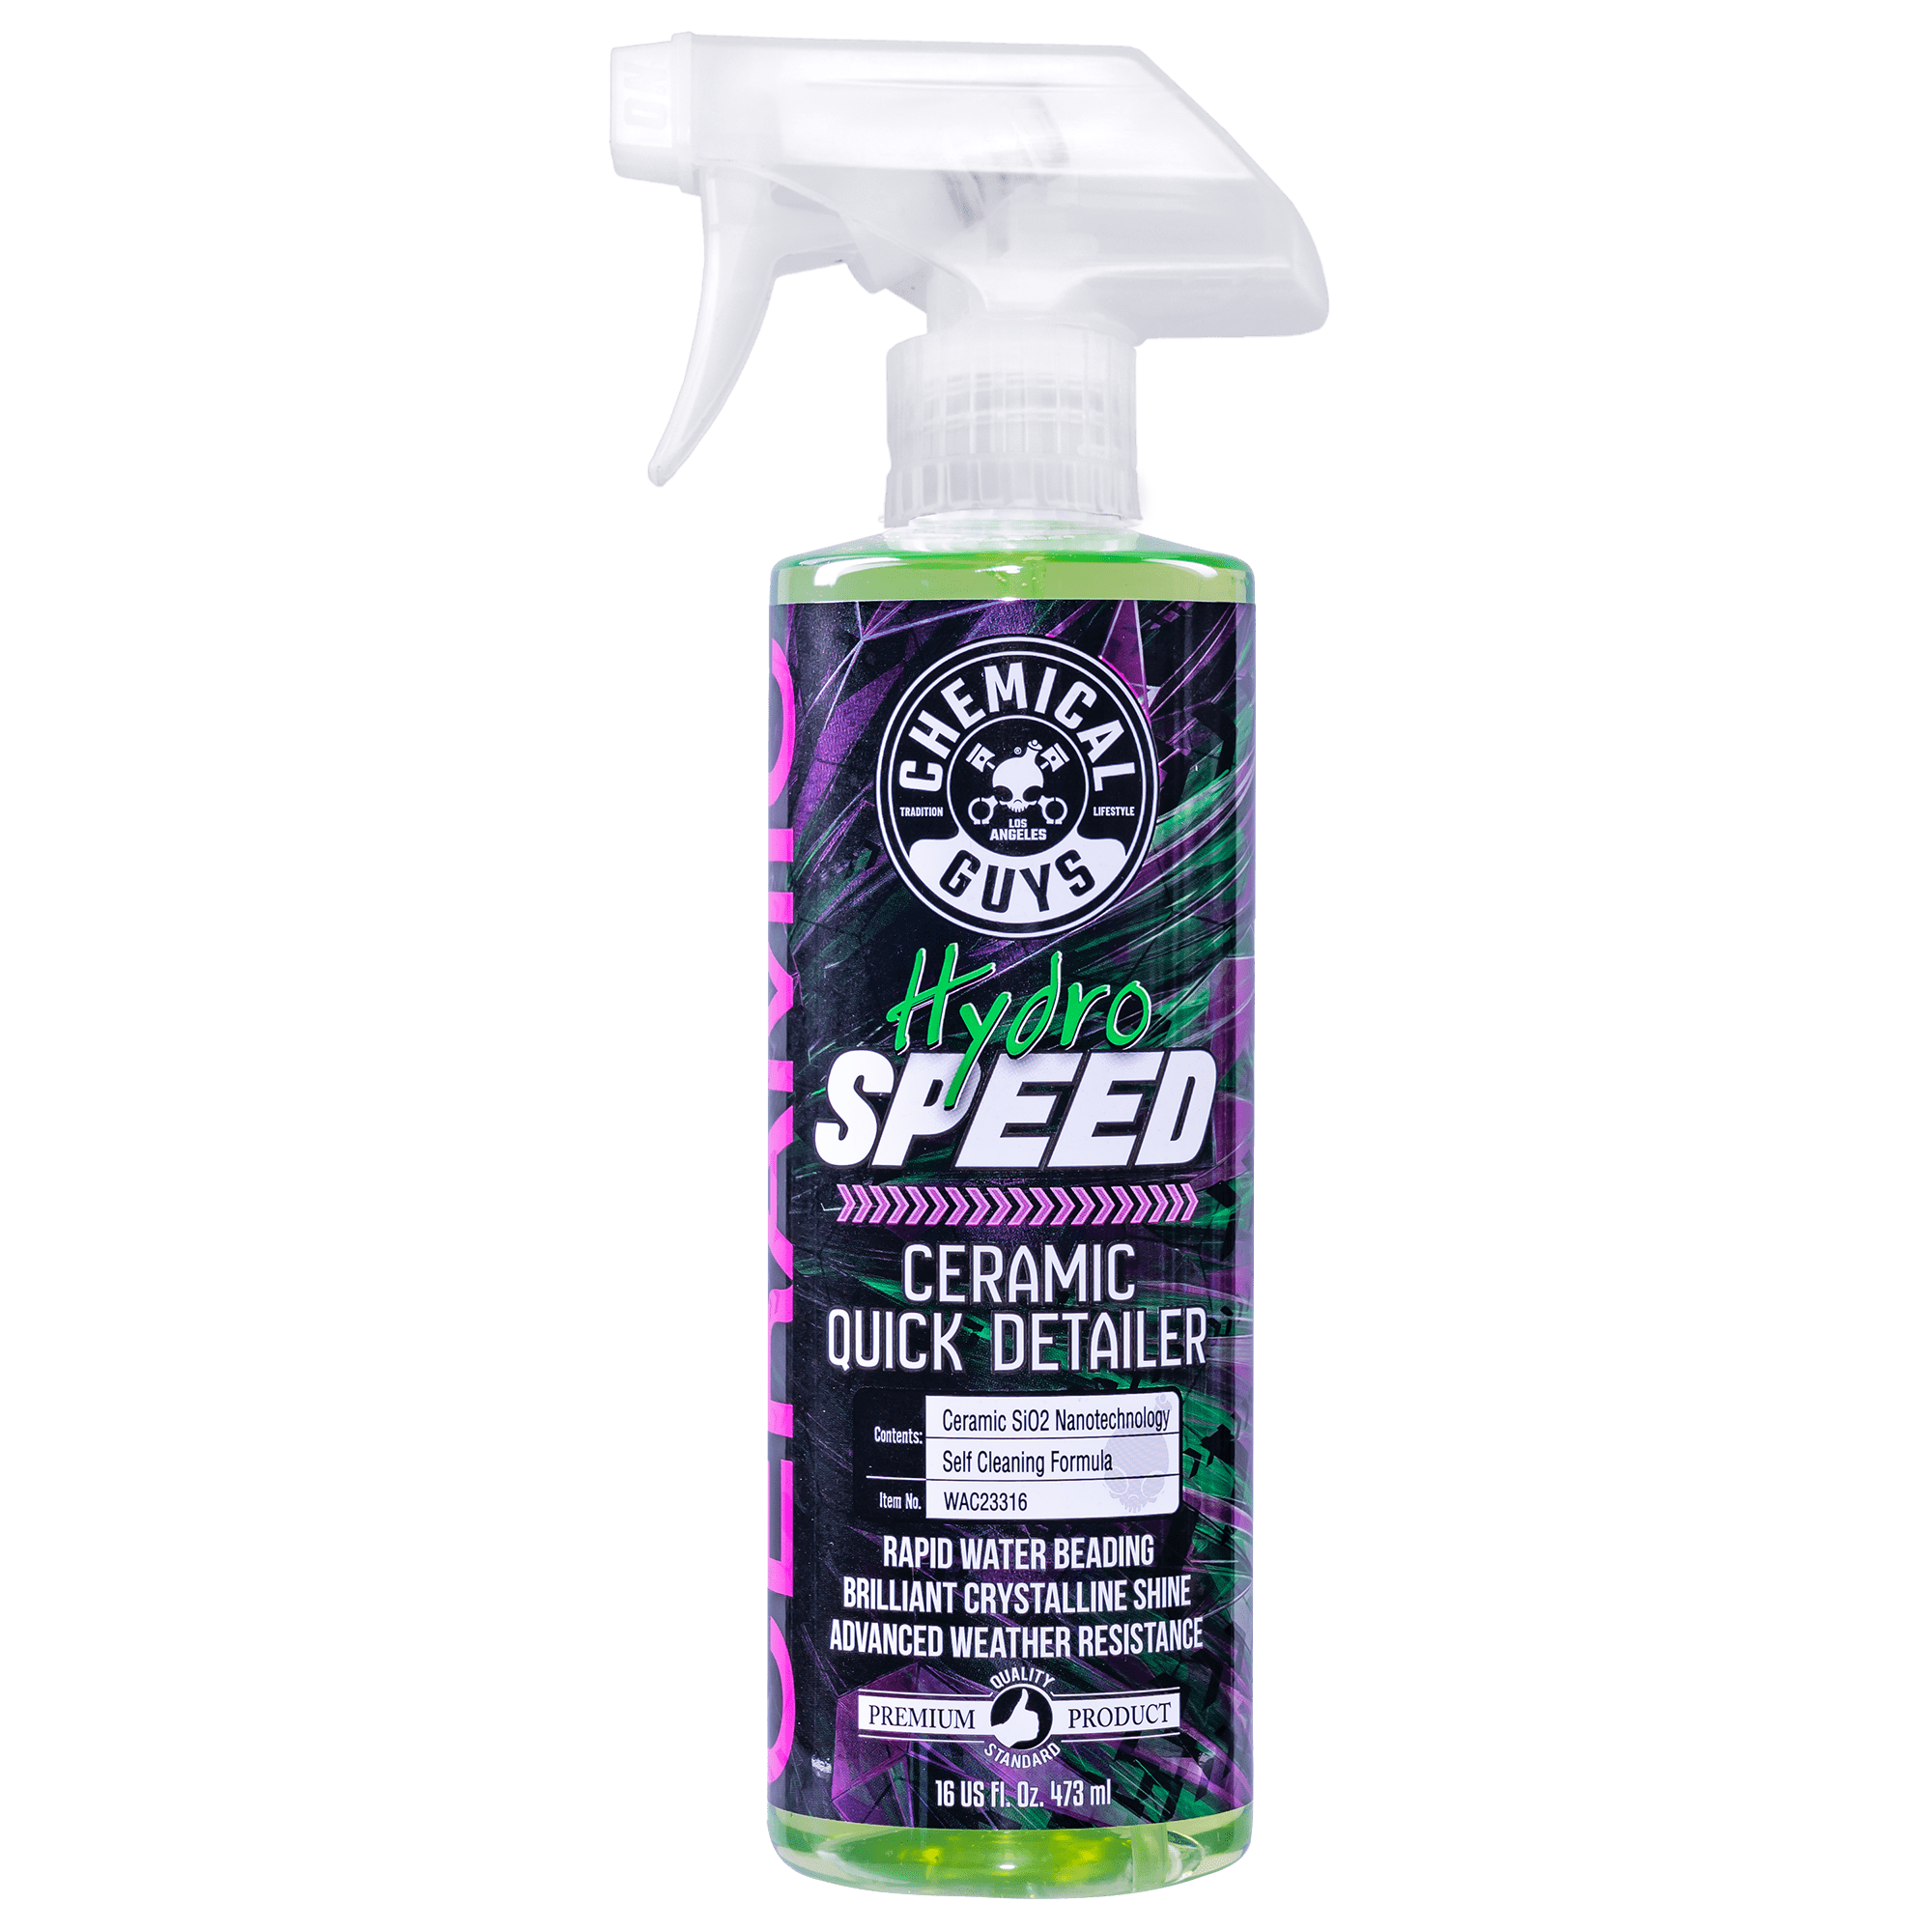  HydroSilex Recharge Car Ceramic Coating - Protective Ultra  Hydrophobic Ceramic Detail Spray Replaces Wax & Sealants - DIY Friendly Car  Care Products That Provide 6 Months of Protection - 8 Ounces : Automotive